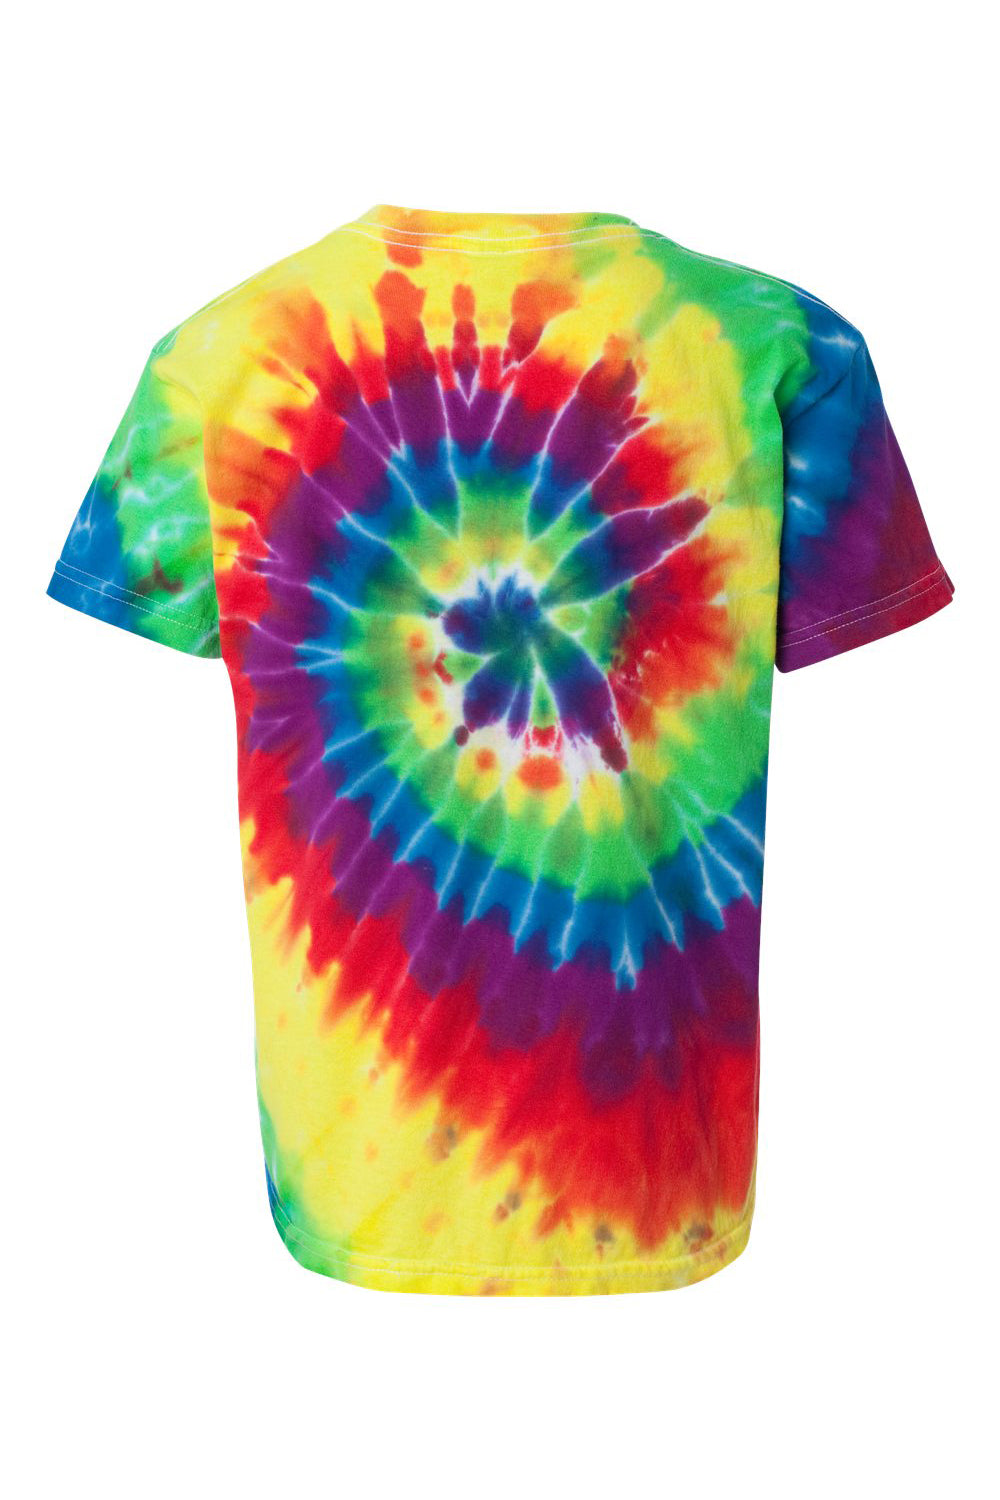 Dyenomite 20BMS Youth Spiral Tie Dyed Crewneck Short Sleeve T-Shirt Classic Rainbow Spiral Flat Back